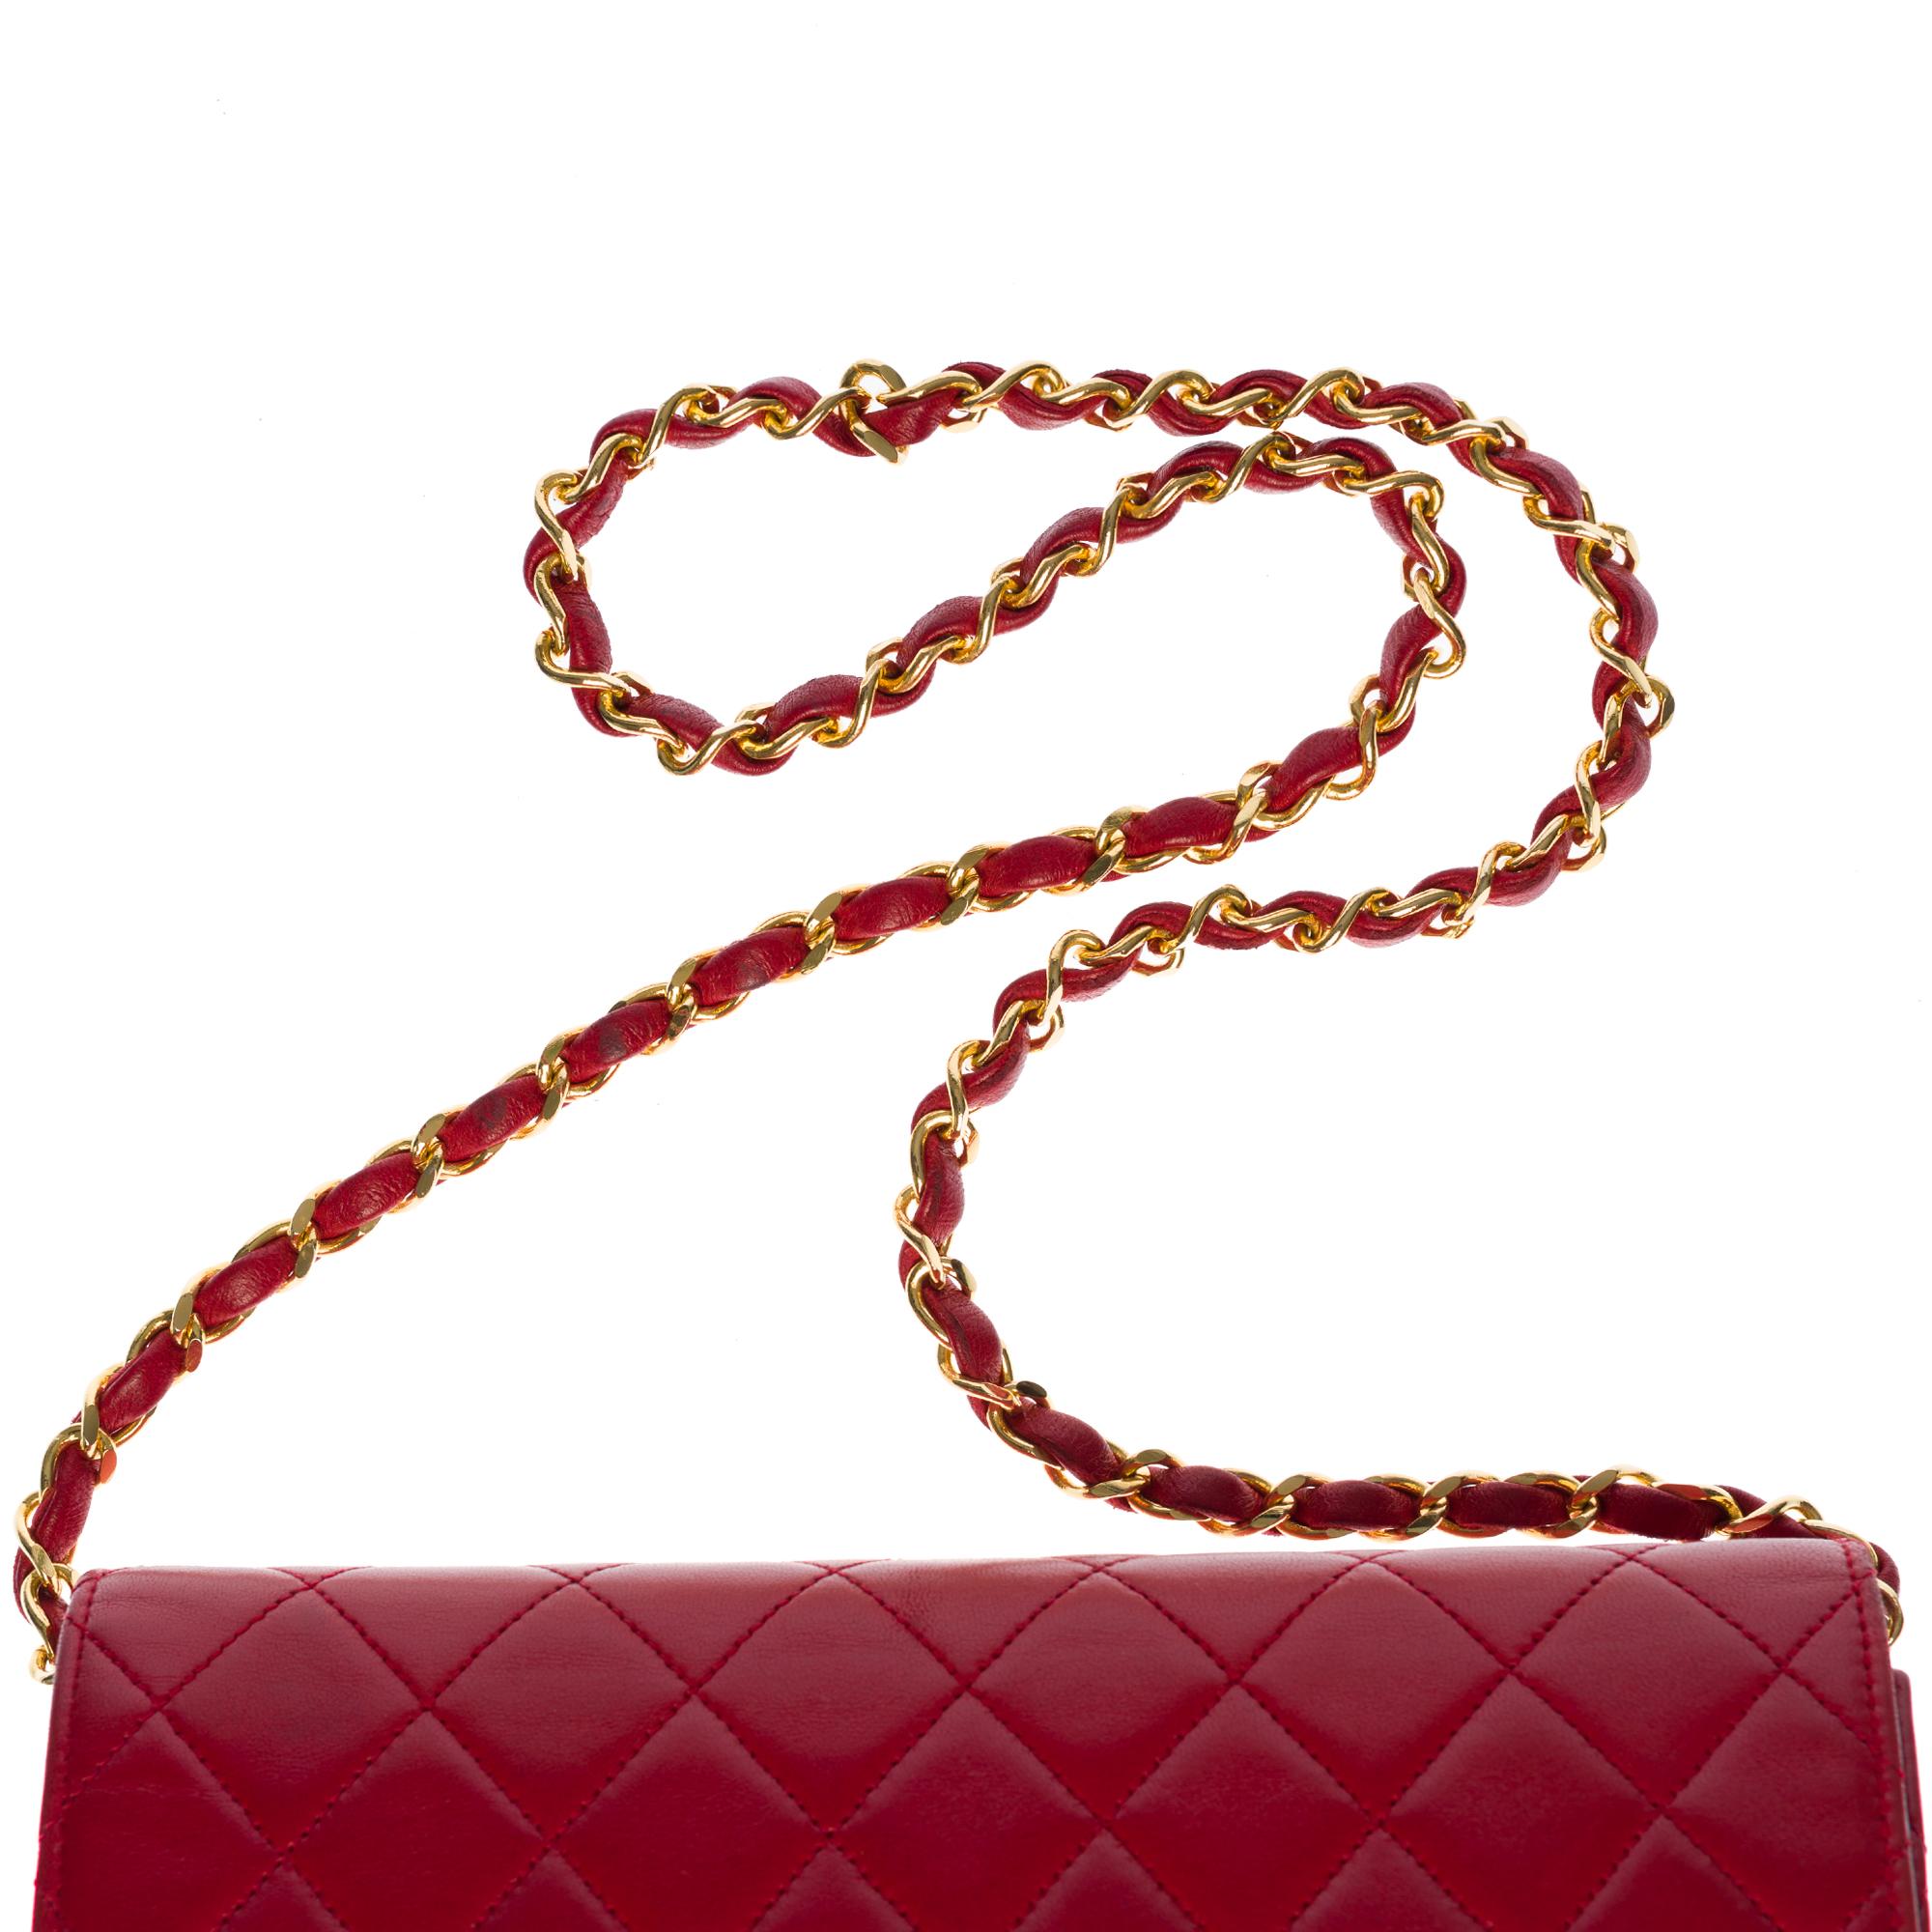 Women's Chanel Classic 22cm shoulder bag in Red quilted lambskin and gold hardware